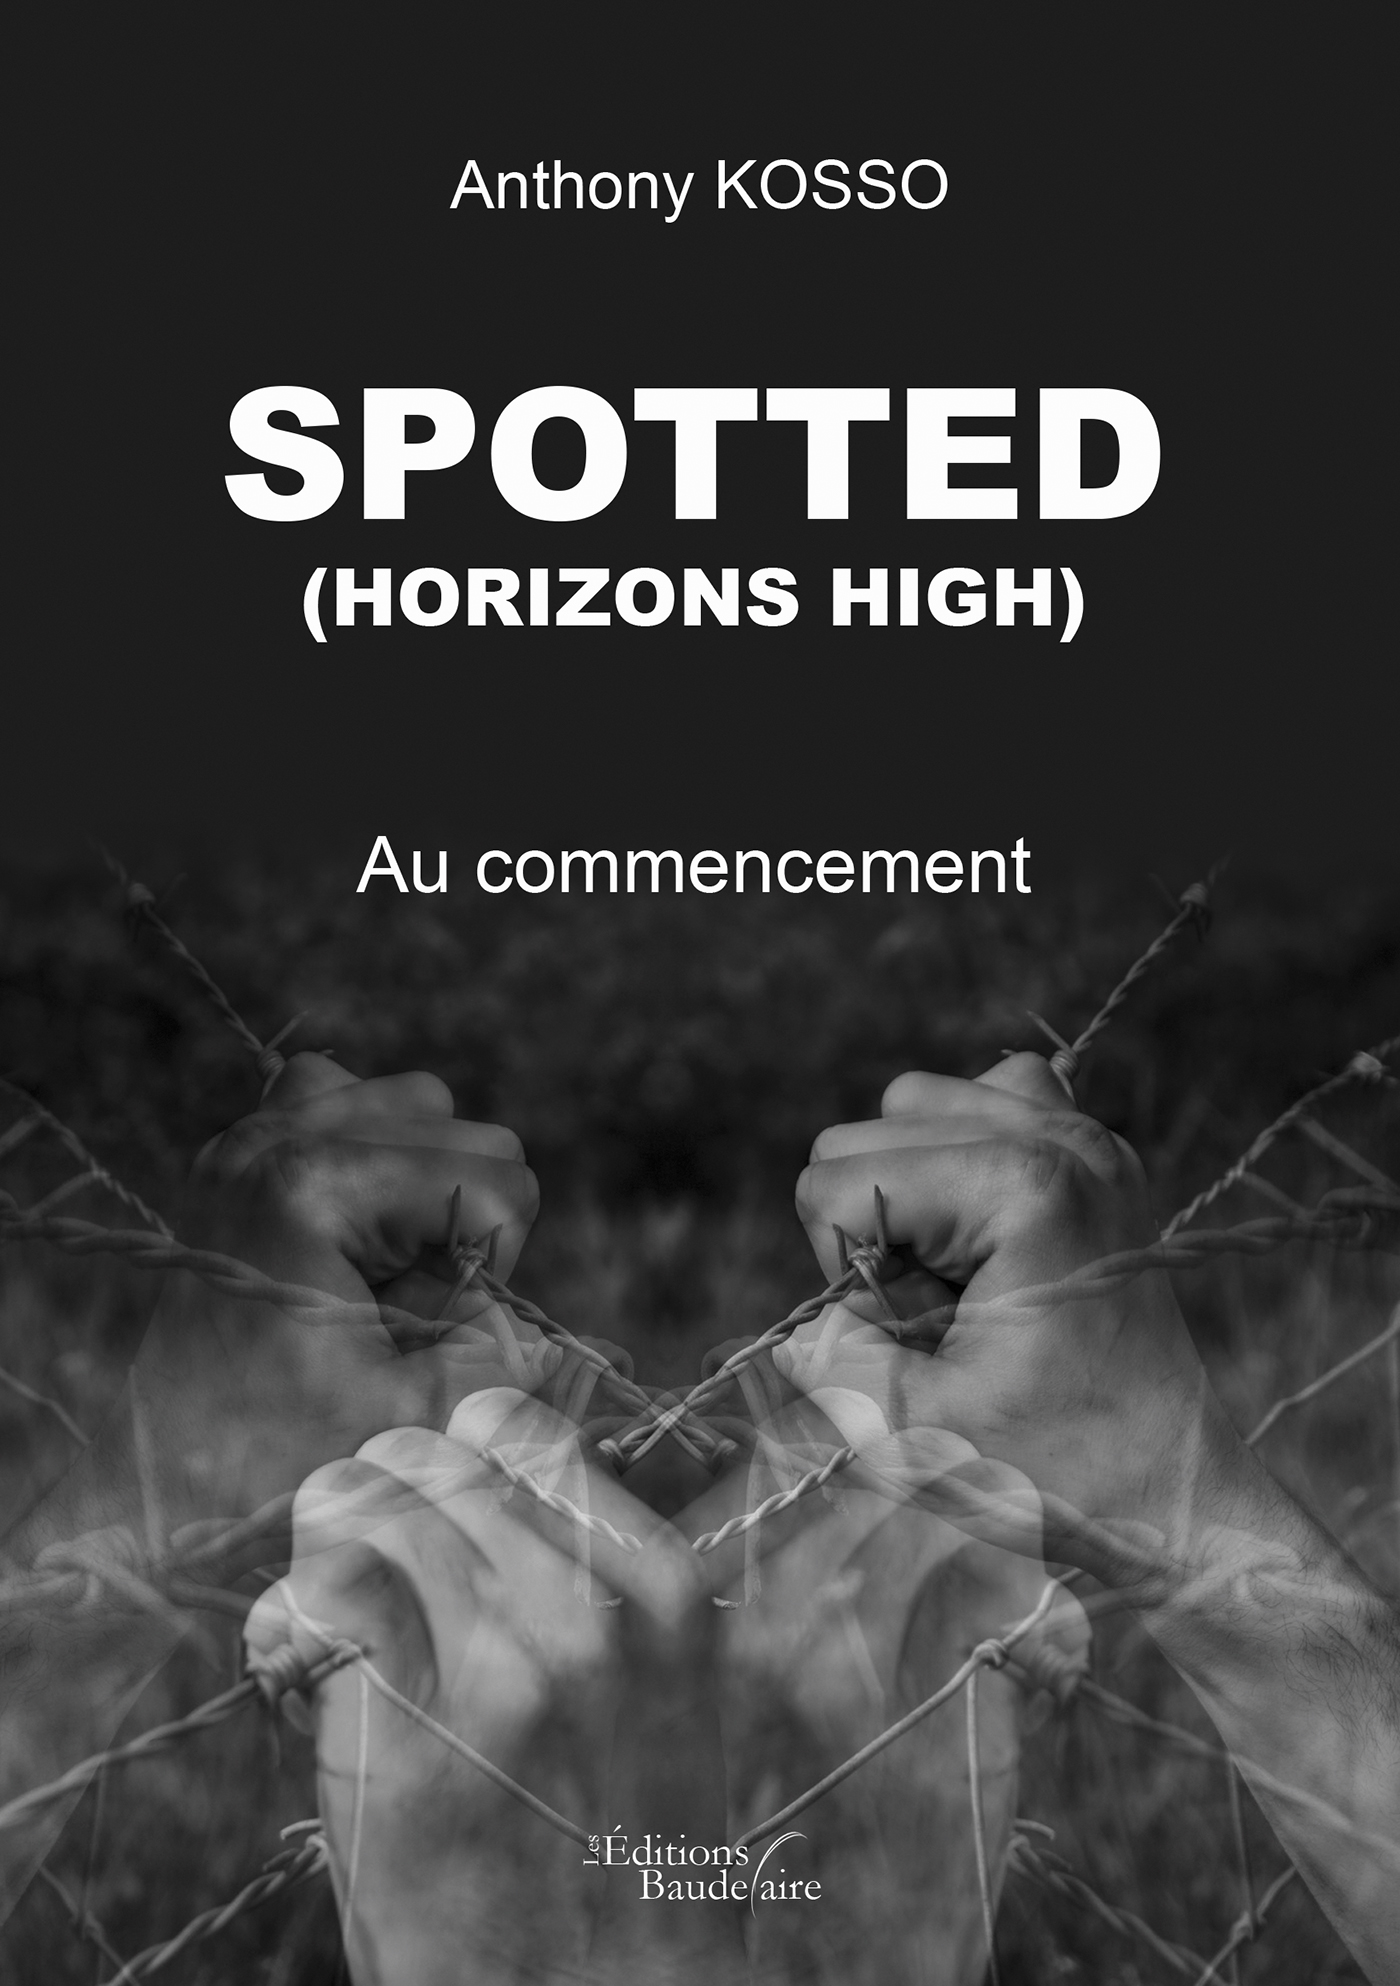 Spotted - (HORIZONS HIGH) - Au commencement